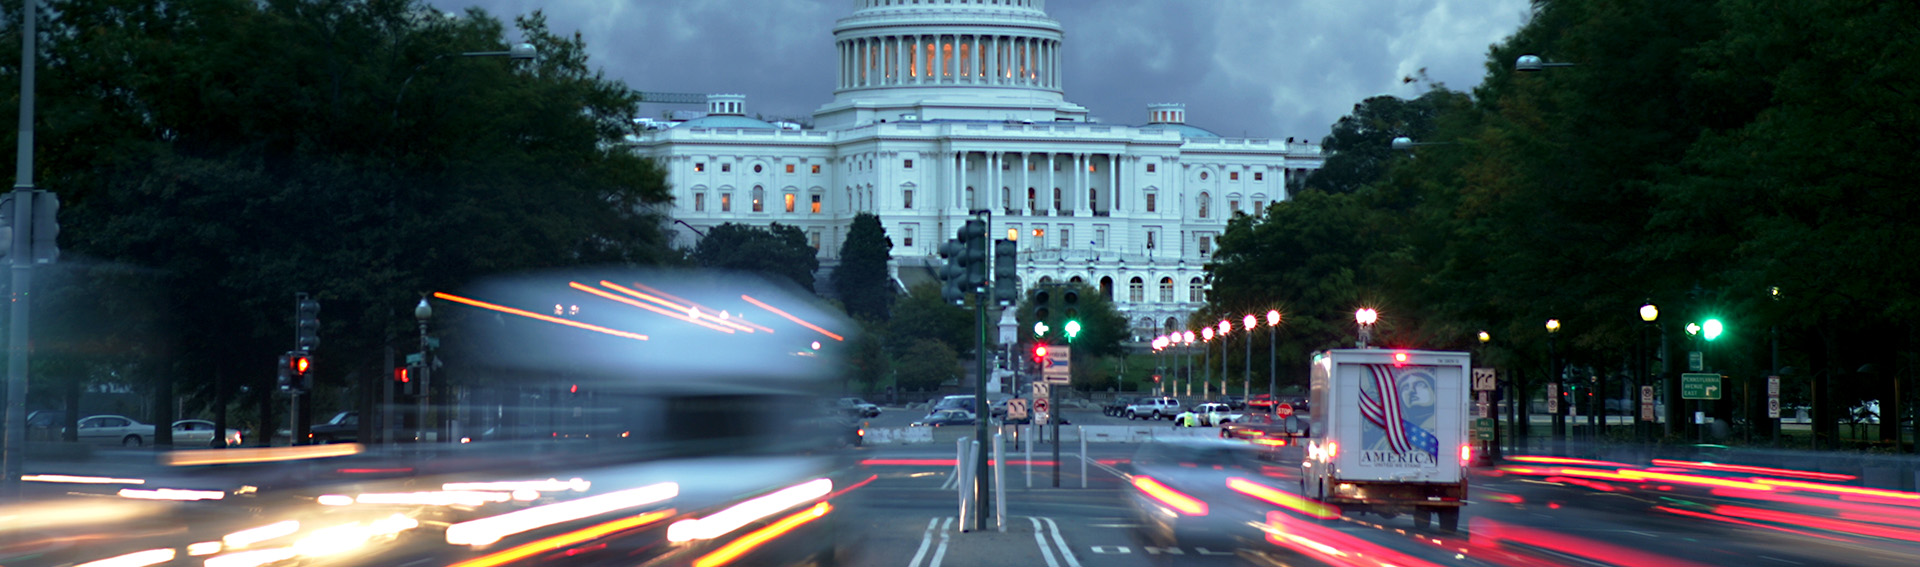 post image Gridlock is Good: What the U.S. Midterm Elections Mean for Markets